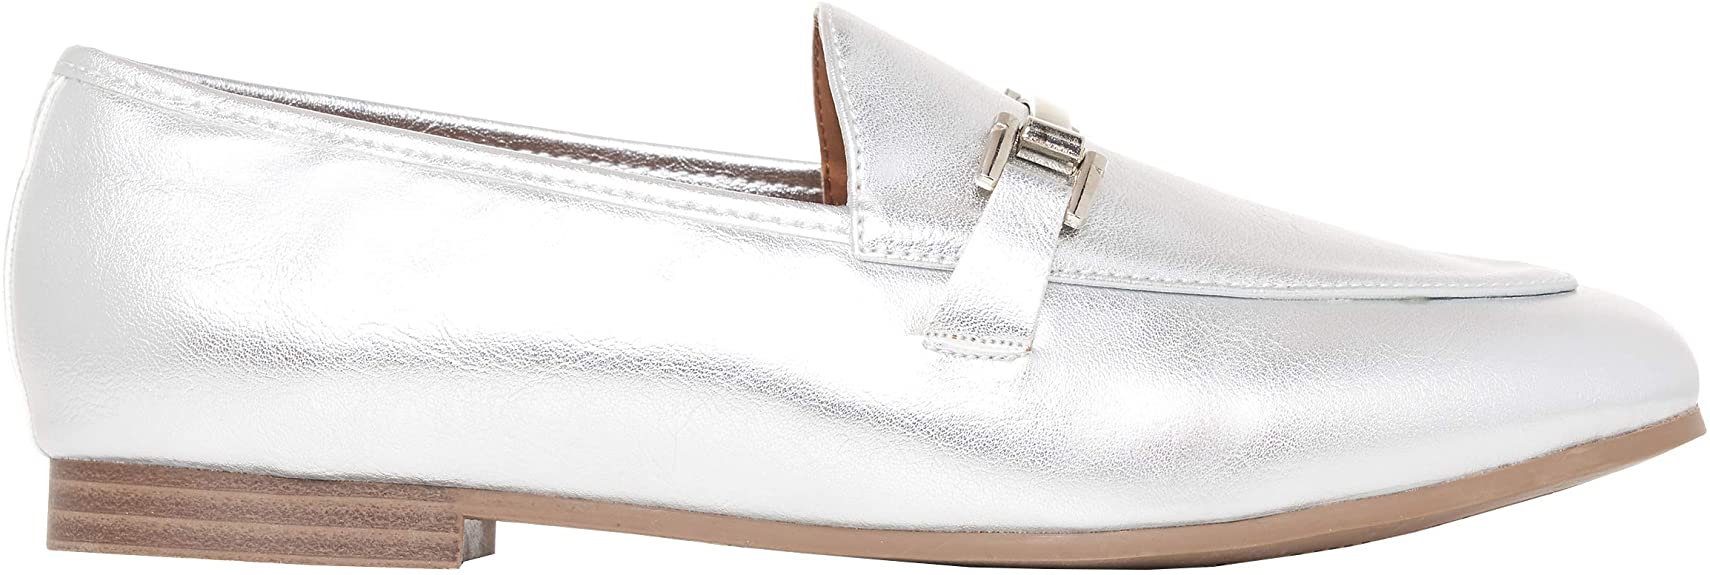 Rohb by Joyce Azria Shira Low Heel Penny Loafer Slip On Comfortable Work Flats for Women